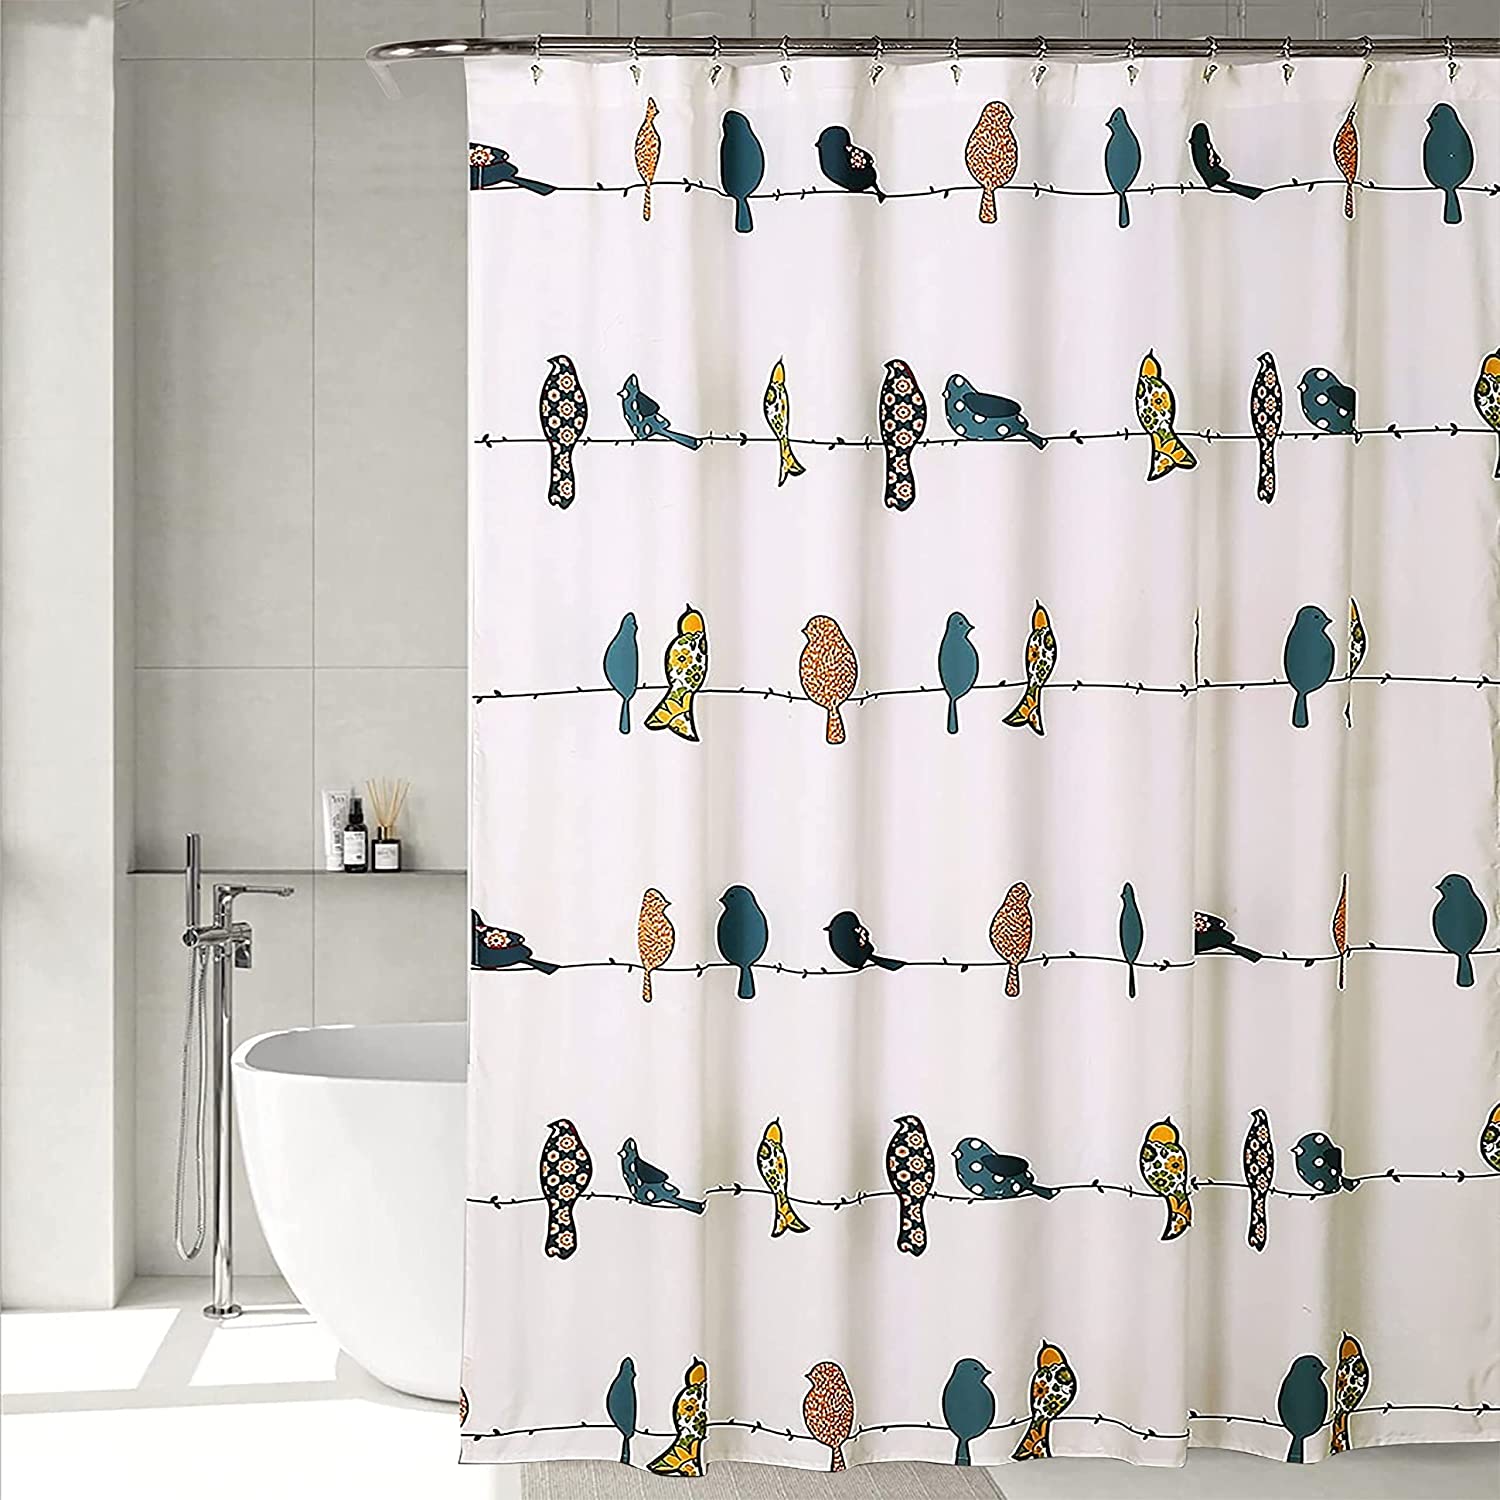 homewards Premium Polyester Birds Design Shower Curtain with 12 Metal Hooks | SS Ball Bearing Rings